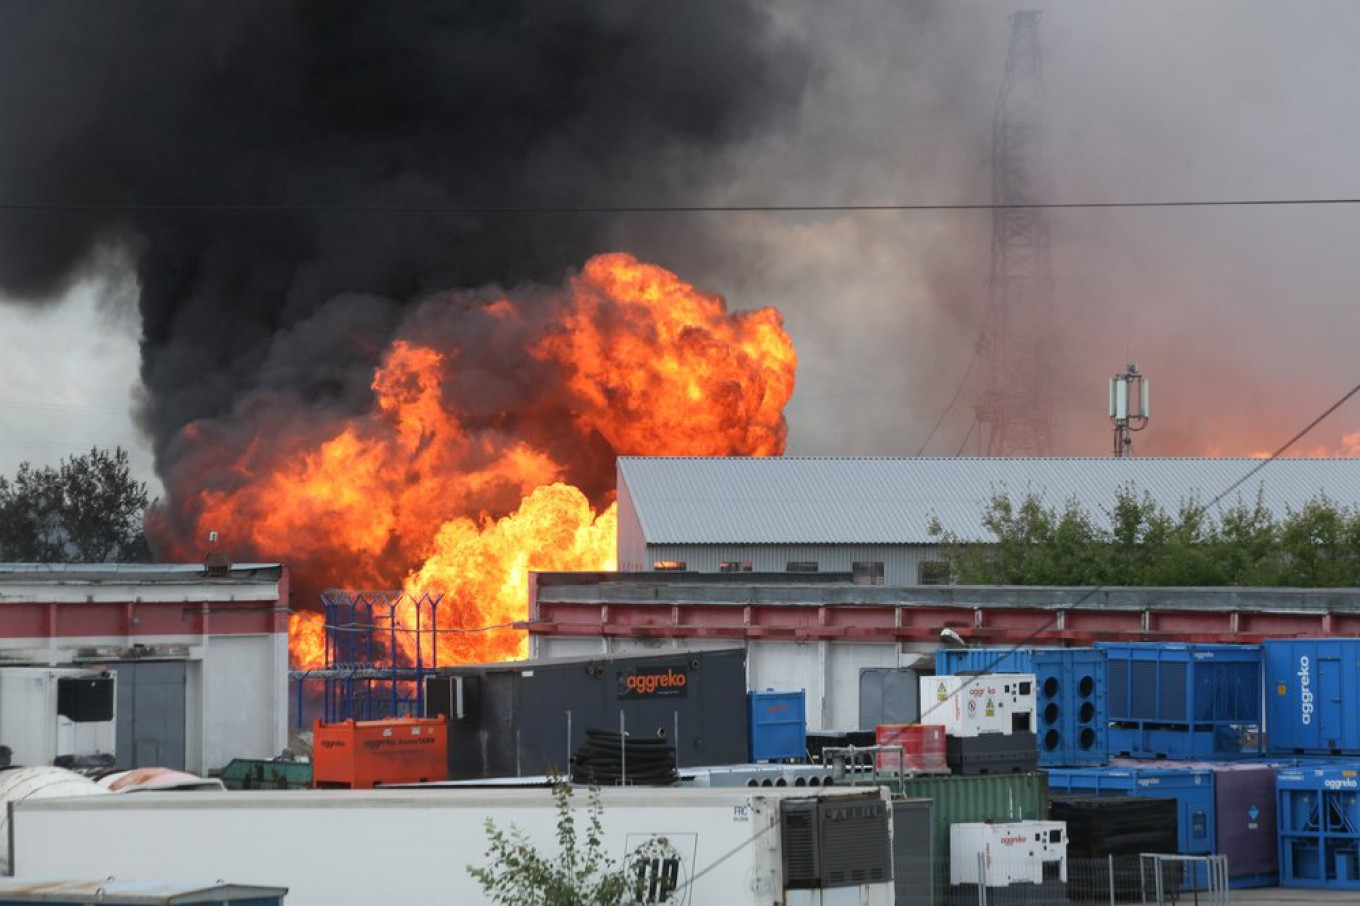 Major Fire Kills 1 and Injures 13 at Power Plant Near Moscow